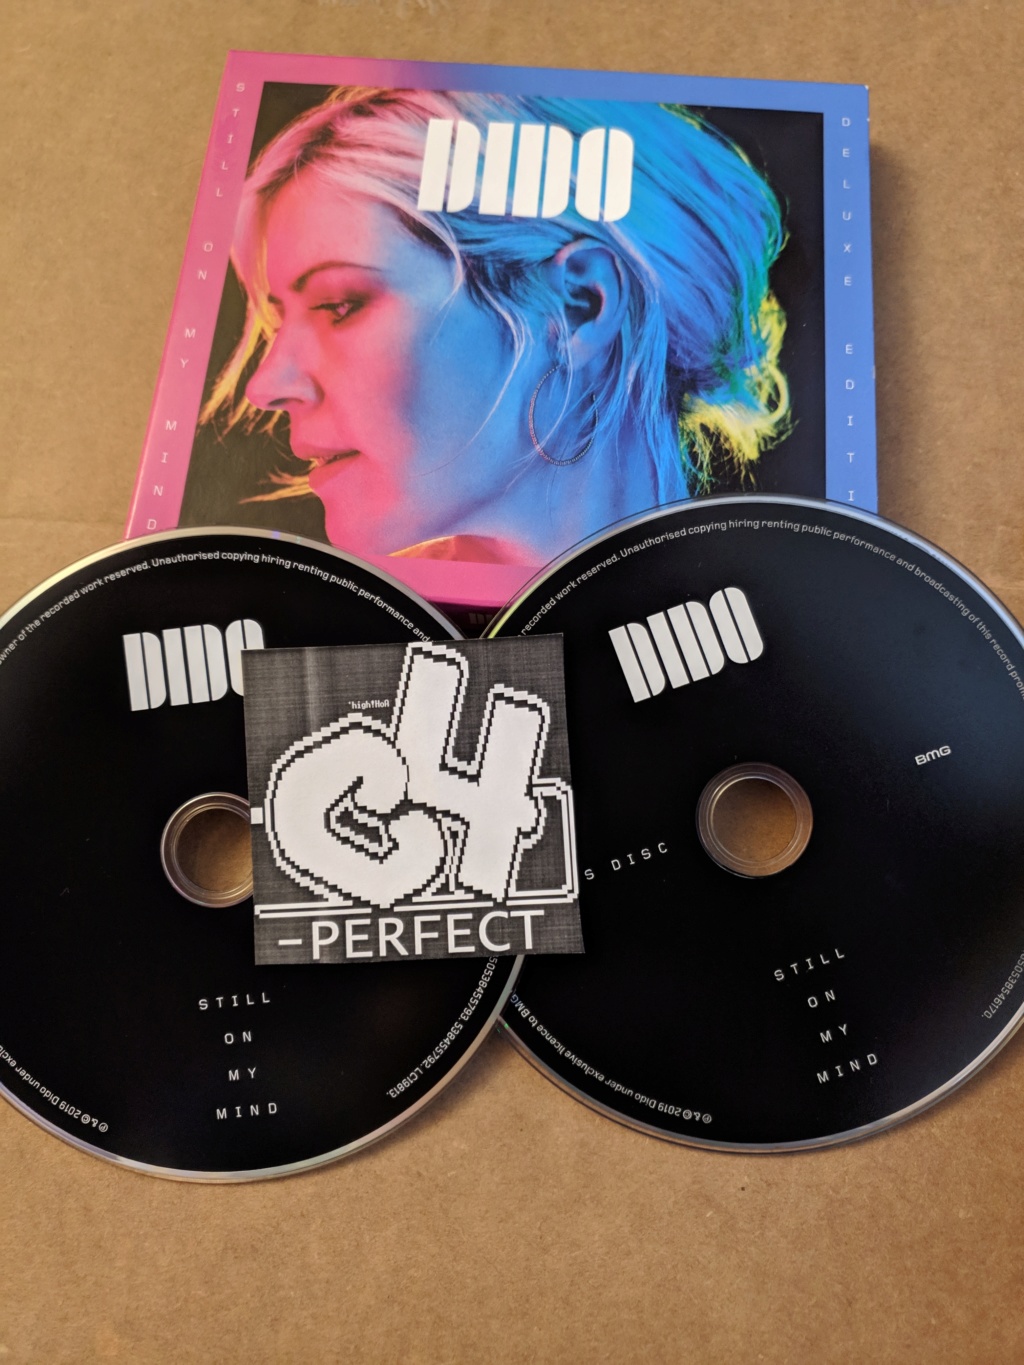 Dido-Still_On_My_Mind-(Deluxe_Edition)-2CD-2019-C4 000-di10